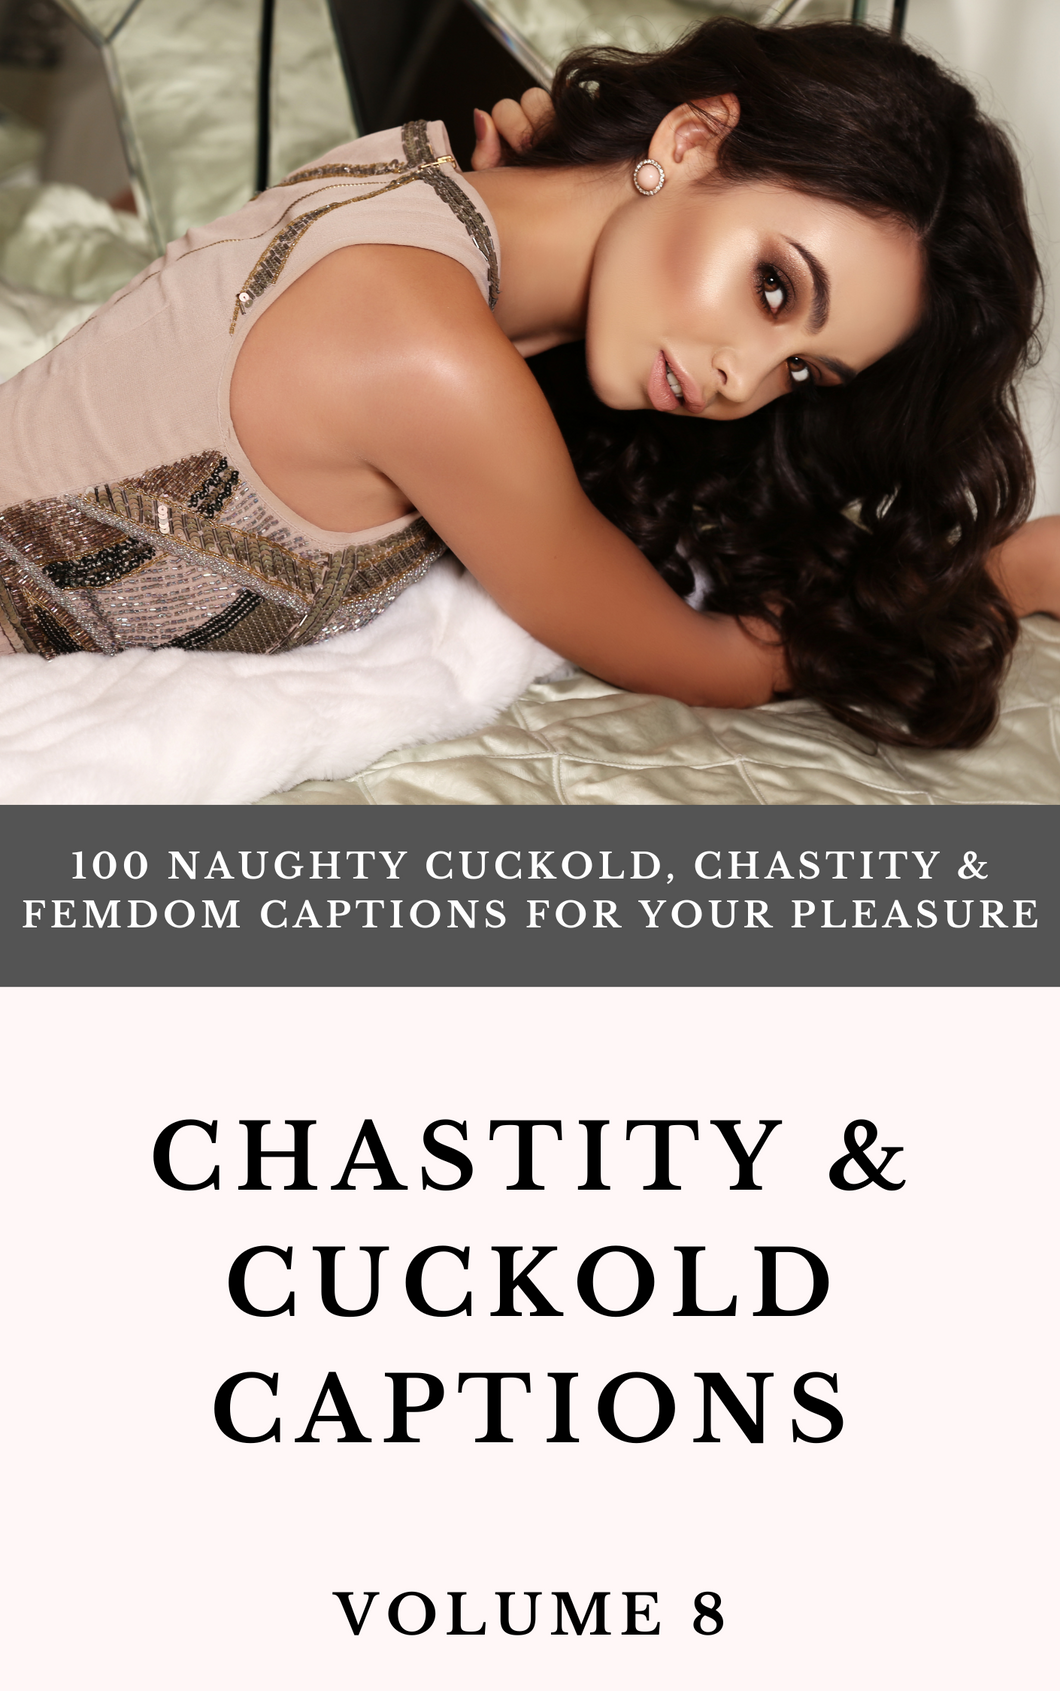 Chastity and Cuckold Captions eBook Volume 8 (PDF) - 100 Naughty Cucky Captions!